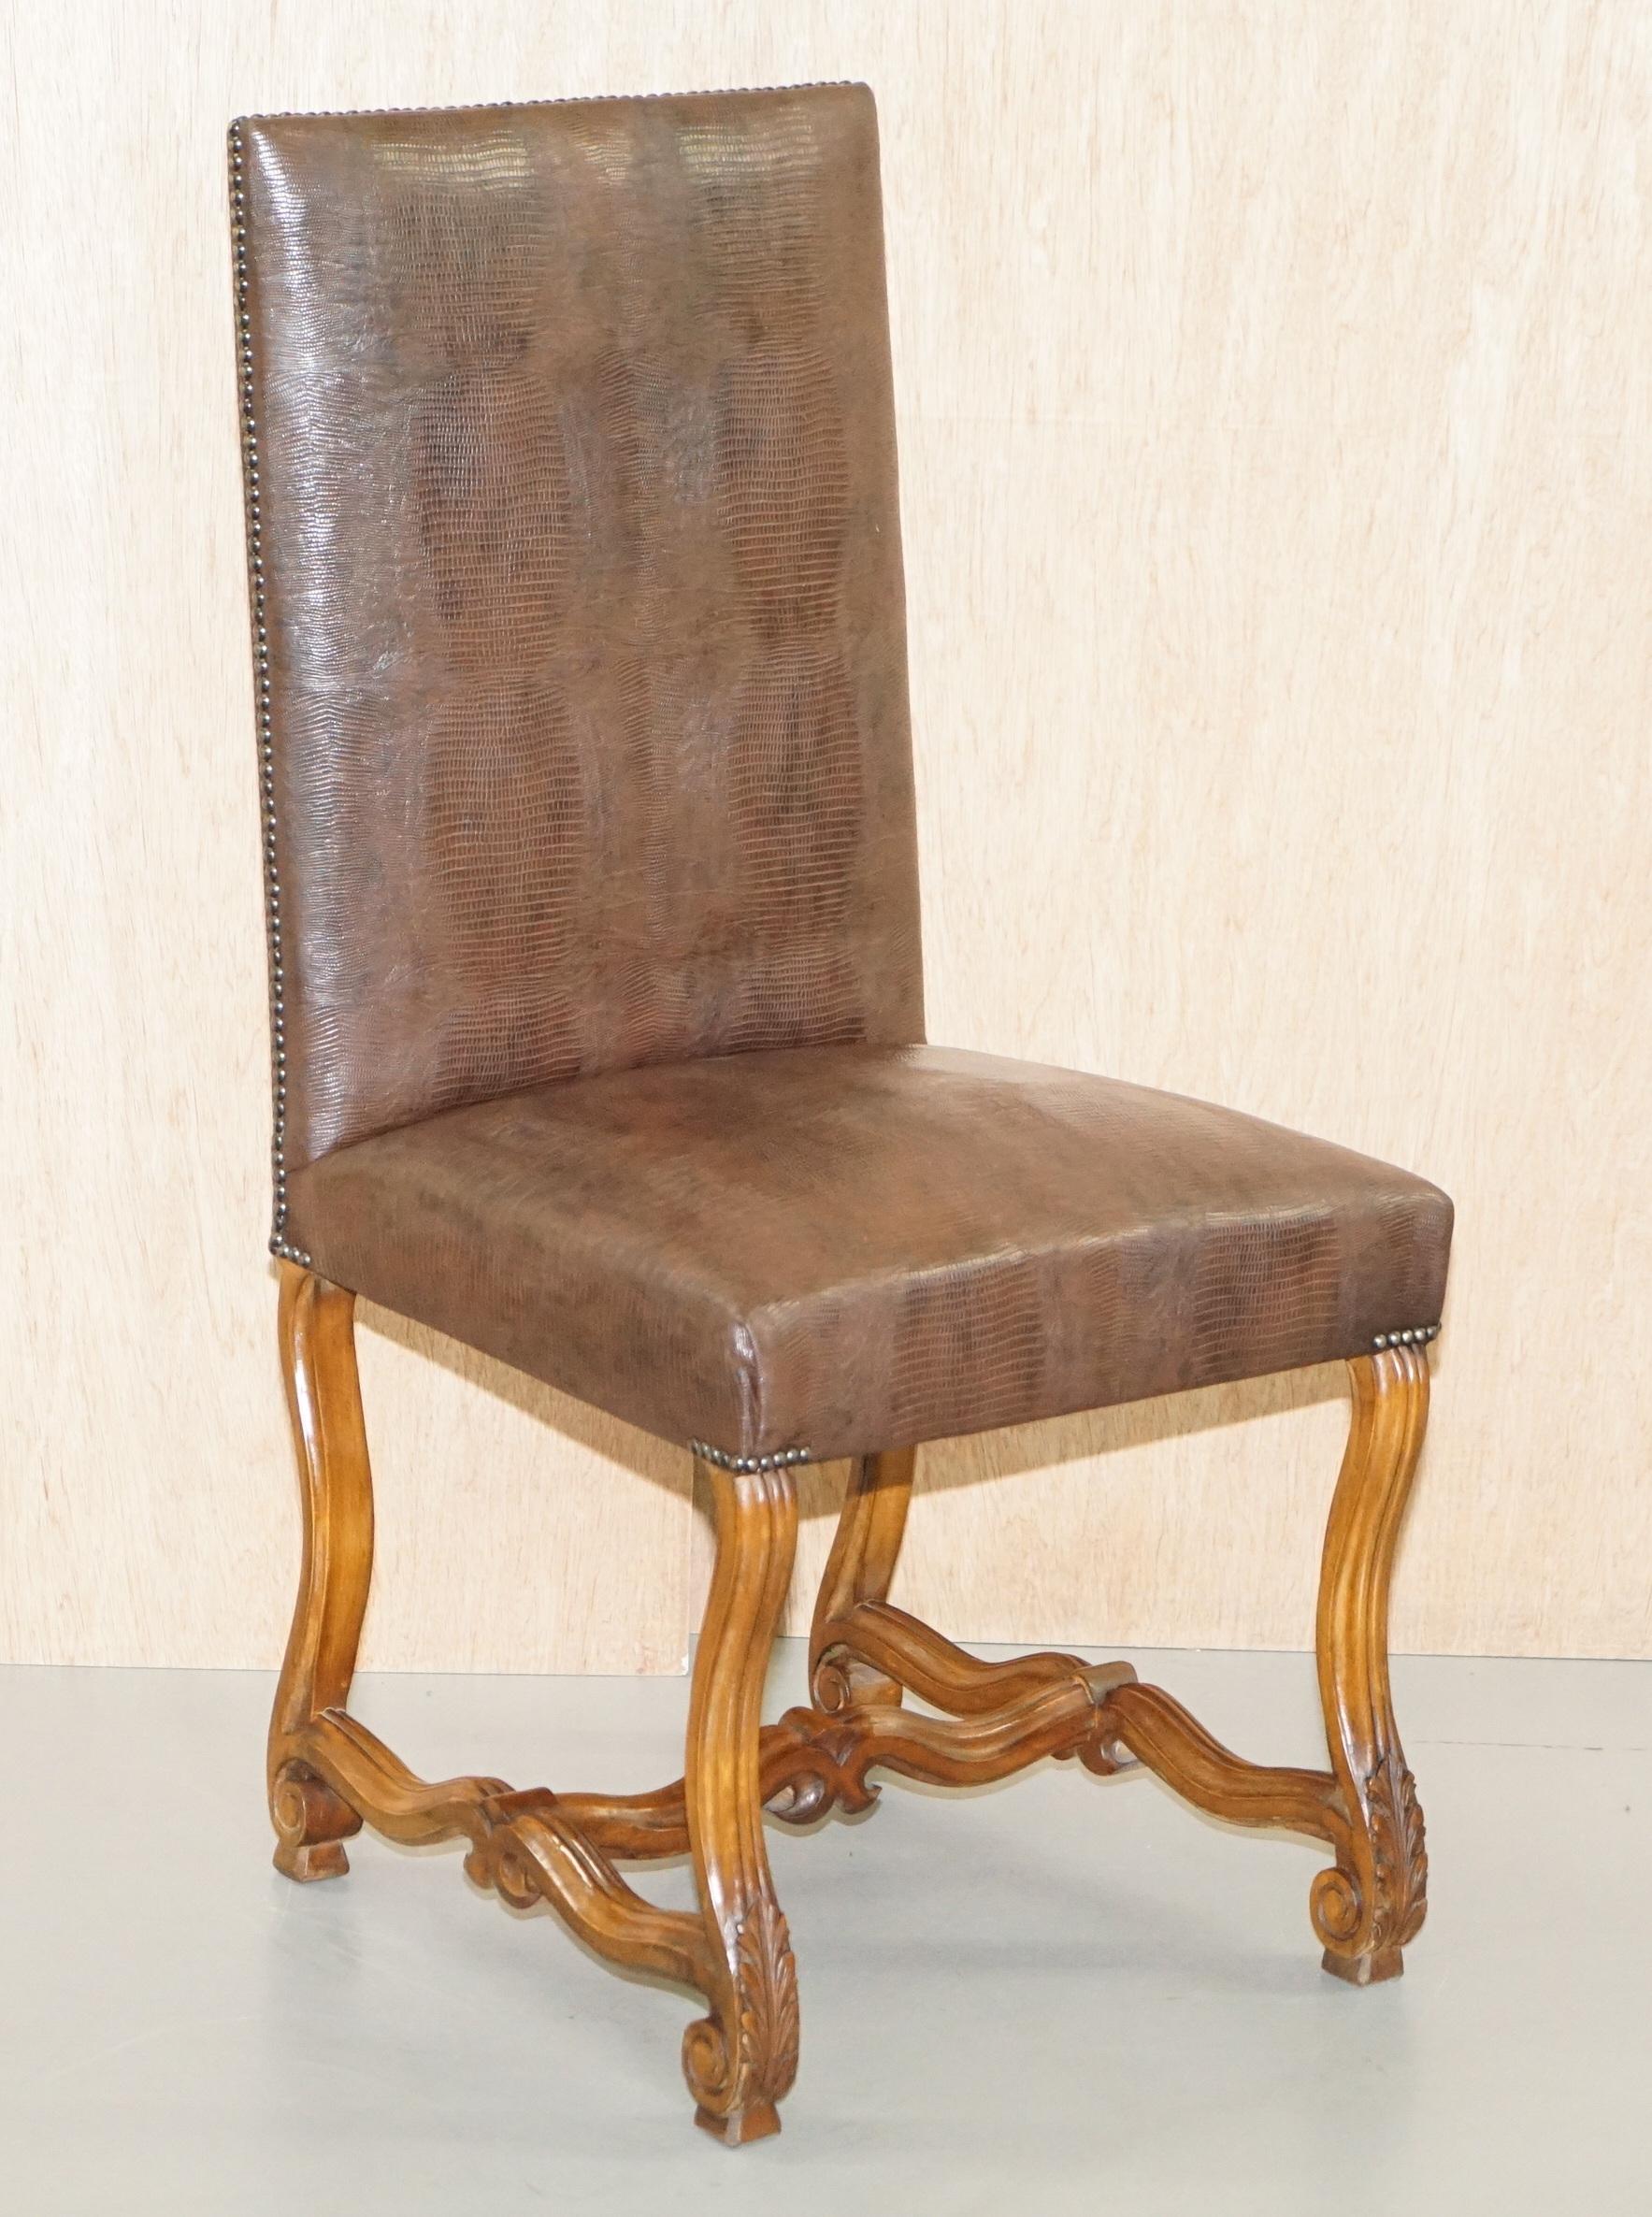 We are delighted to offer for sale this exquisite suite of handmade in Italy Carolean dining chairs with walnut frames and crocodile patina brown leather upholstery

A truly important looking and exceptionally finely made suite of ten dining